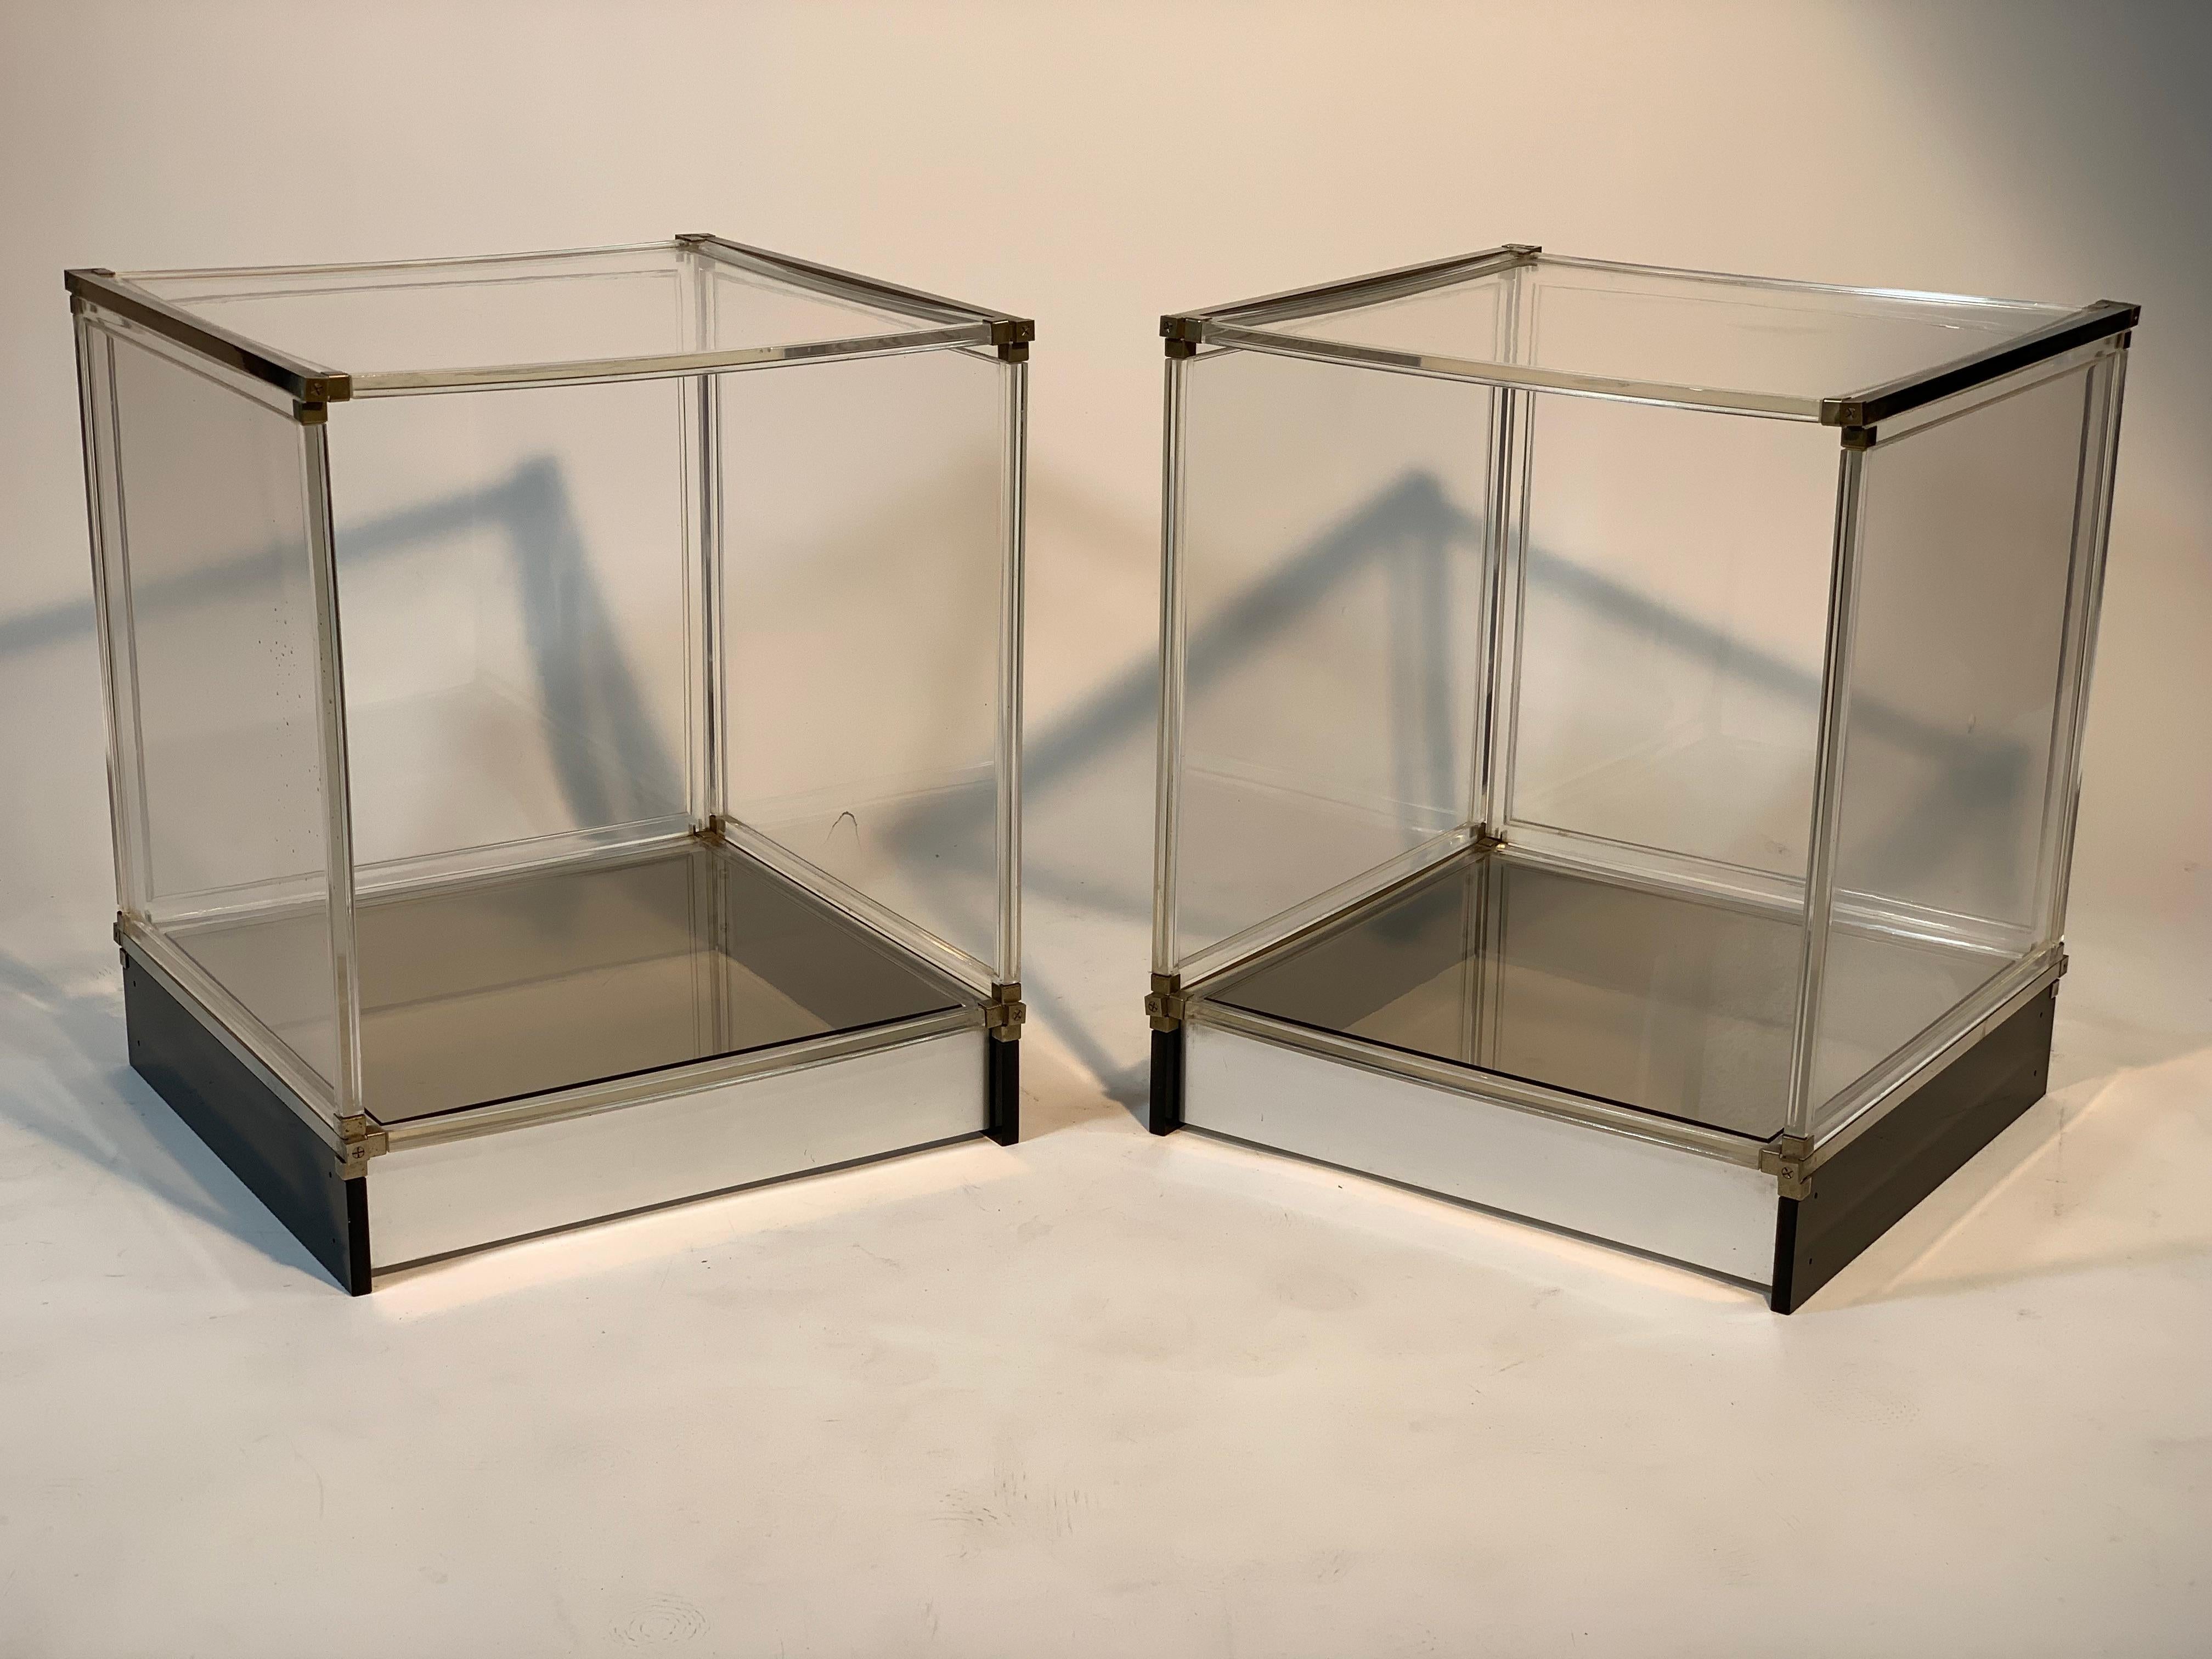 Pair of mid century Italian side tables with three sides in lucite, one side open with a glass shelf, chromed metal frame.
Products in the 70s combine 3 materials typical of the time to obtain new coffee tables with a transparent design and